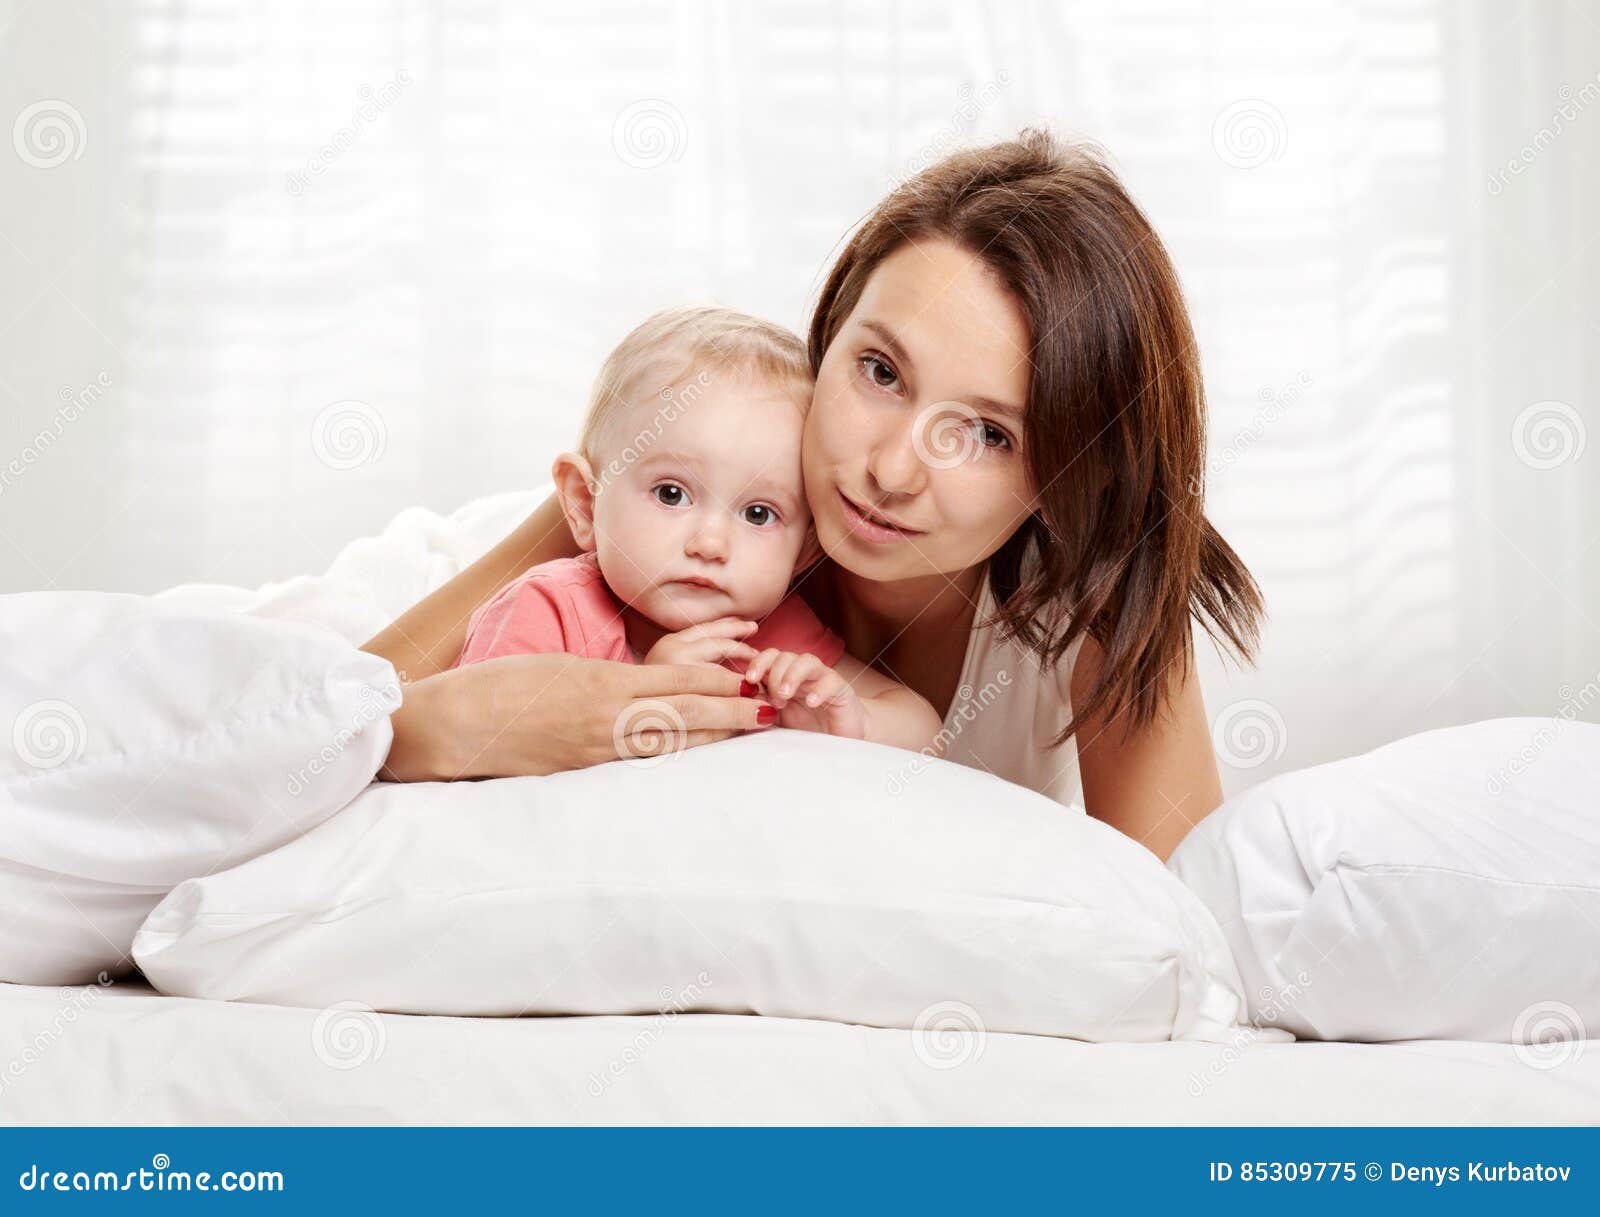 Happy Family Mother and Baby Having Fun on Bed Stock Image - Image of ...